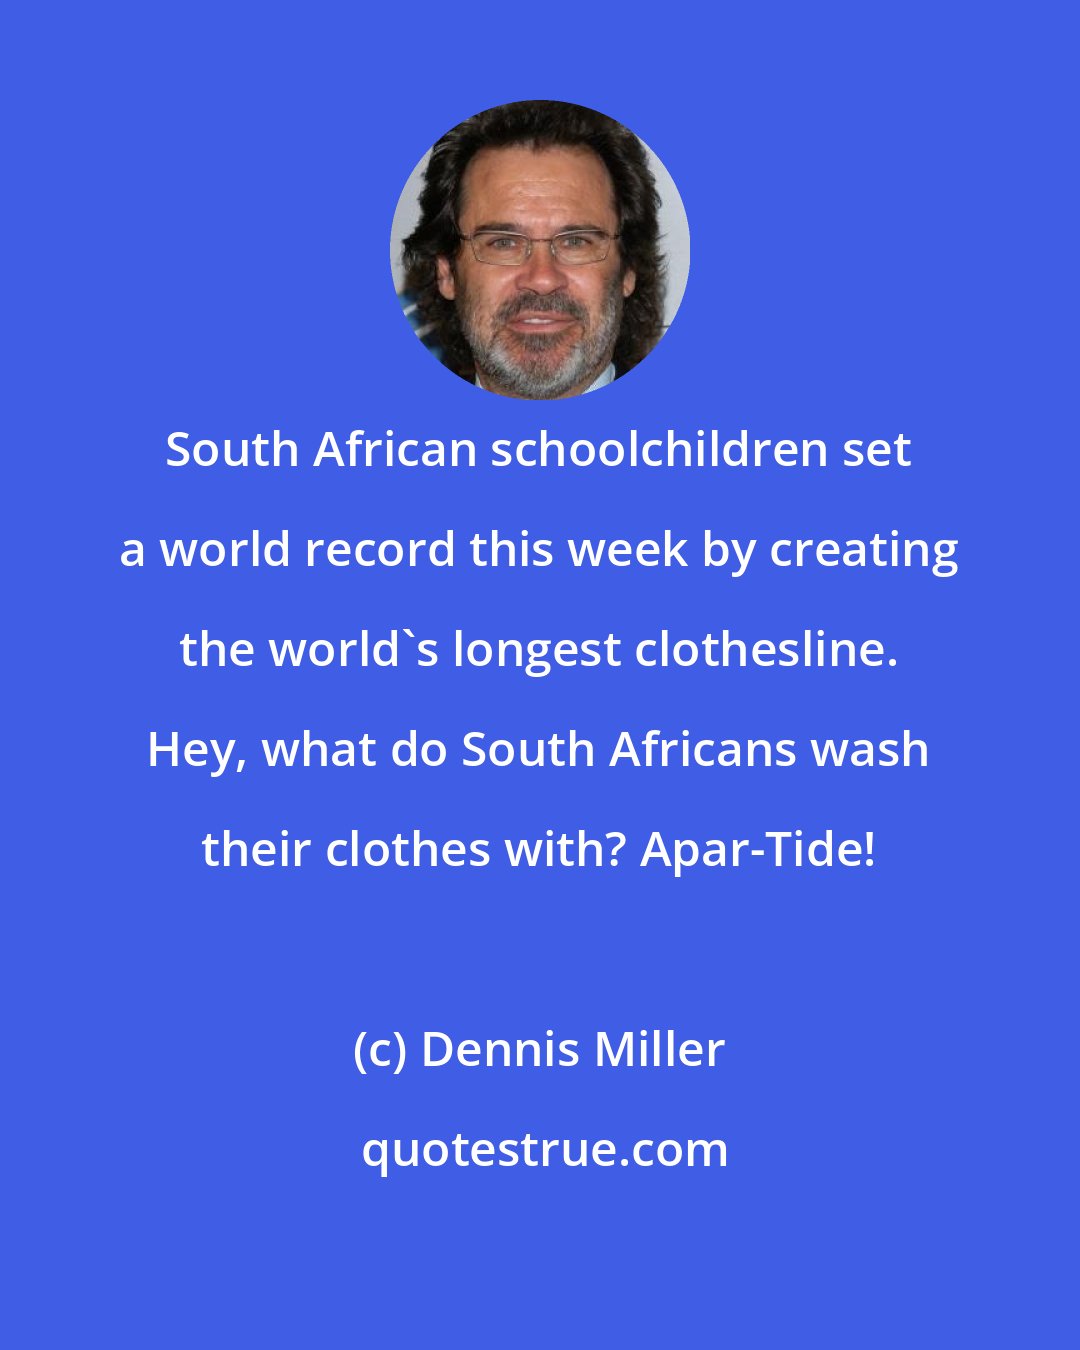 Dennis Miller: South African schoolchildren set a world record this week by creating the world's longest clothesline. Hey, what do South Africans wash their clothes with? Apar-Tide!